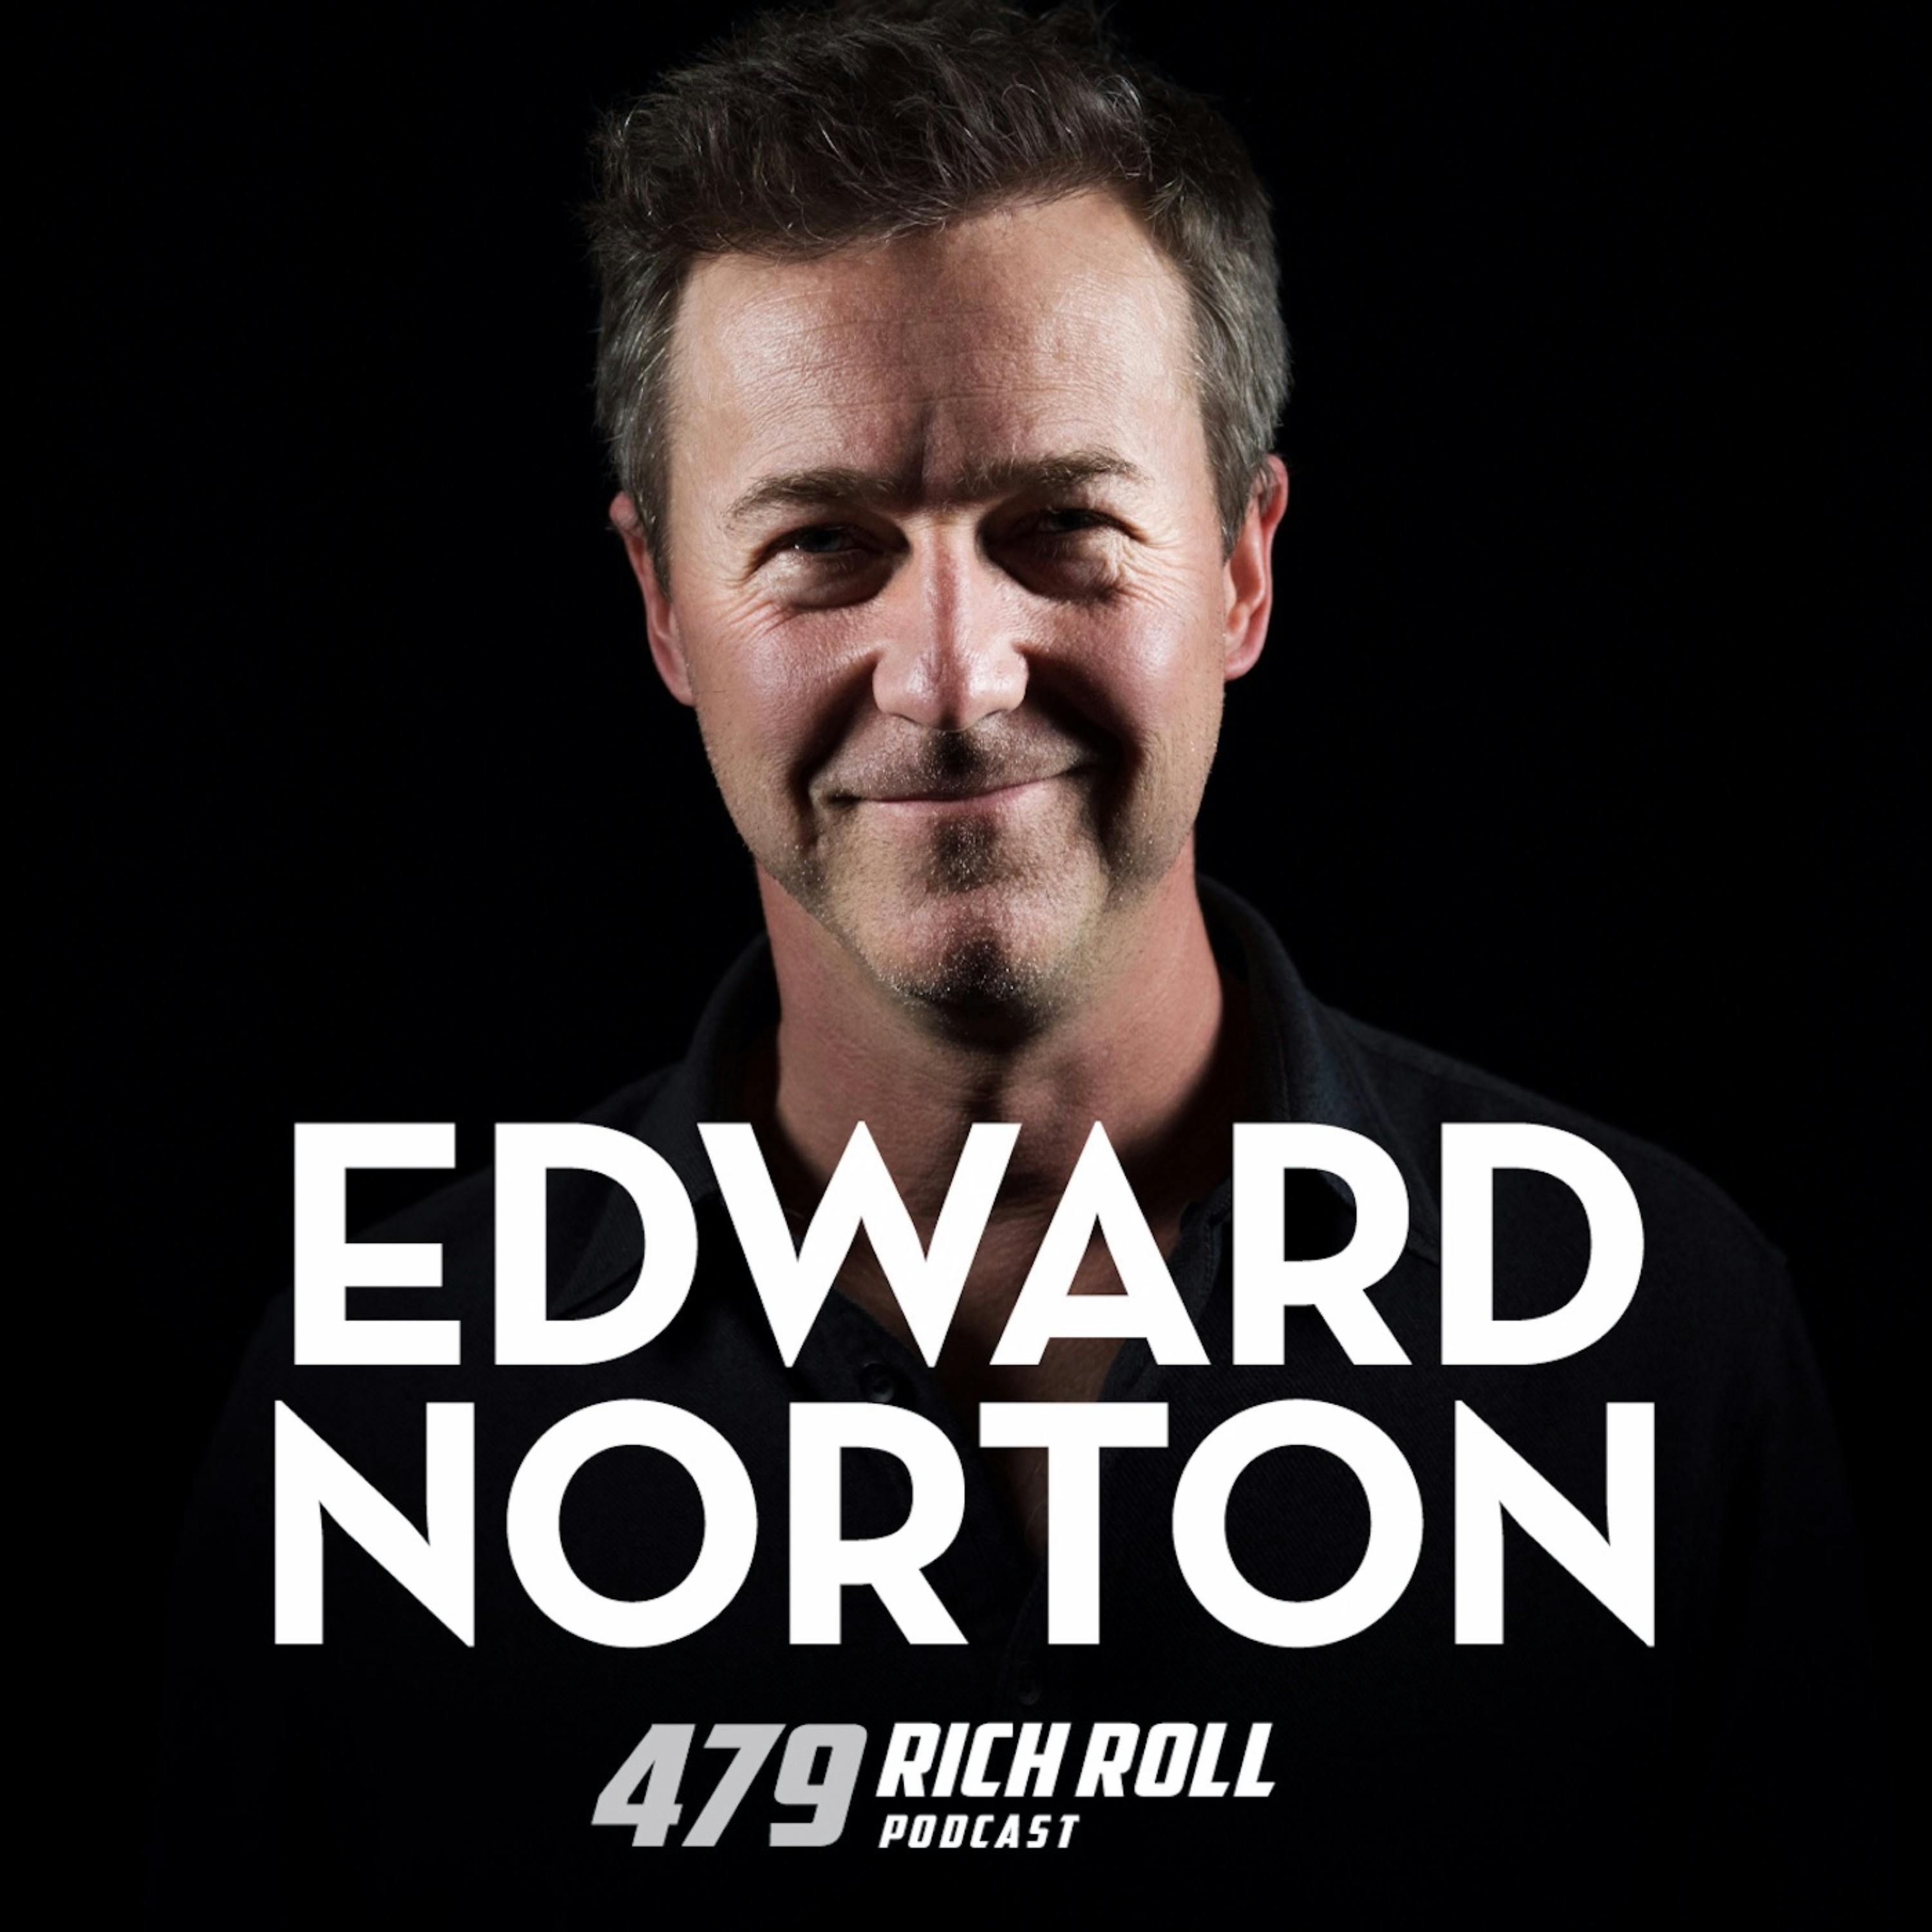 Edward Norton: Thoughts On Ego, Taking Big Swings & Speaking Truth To Power